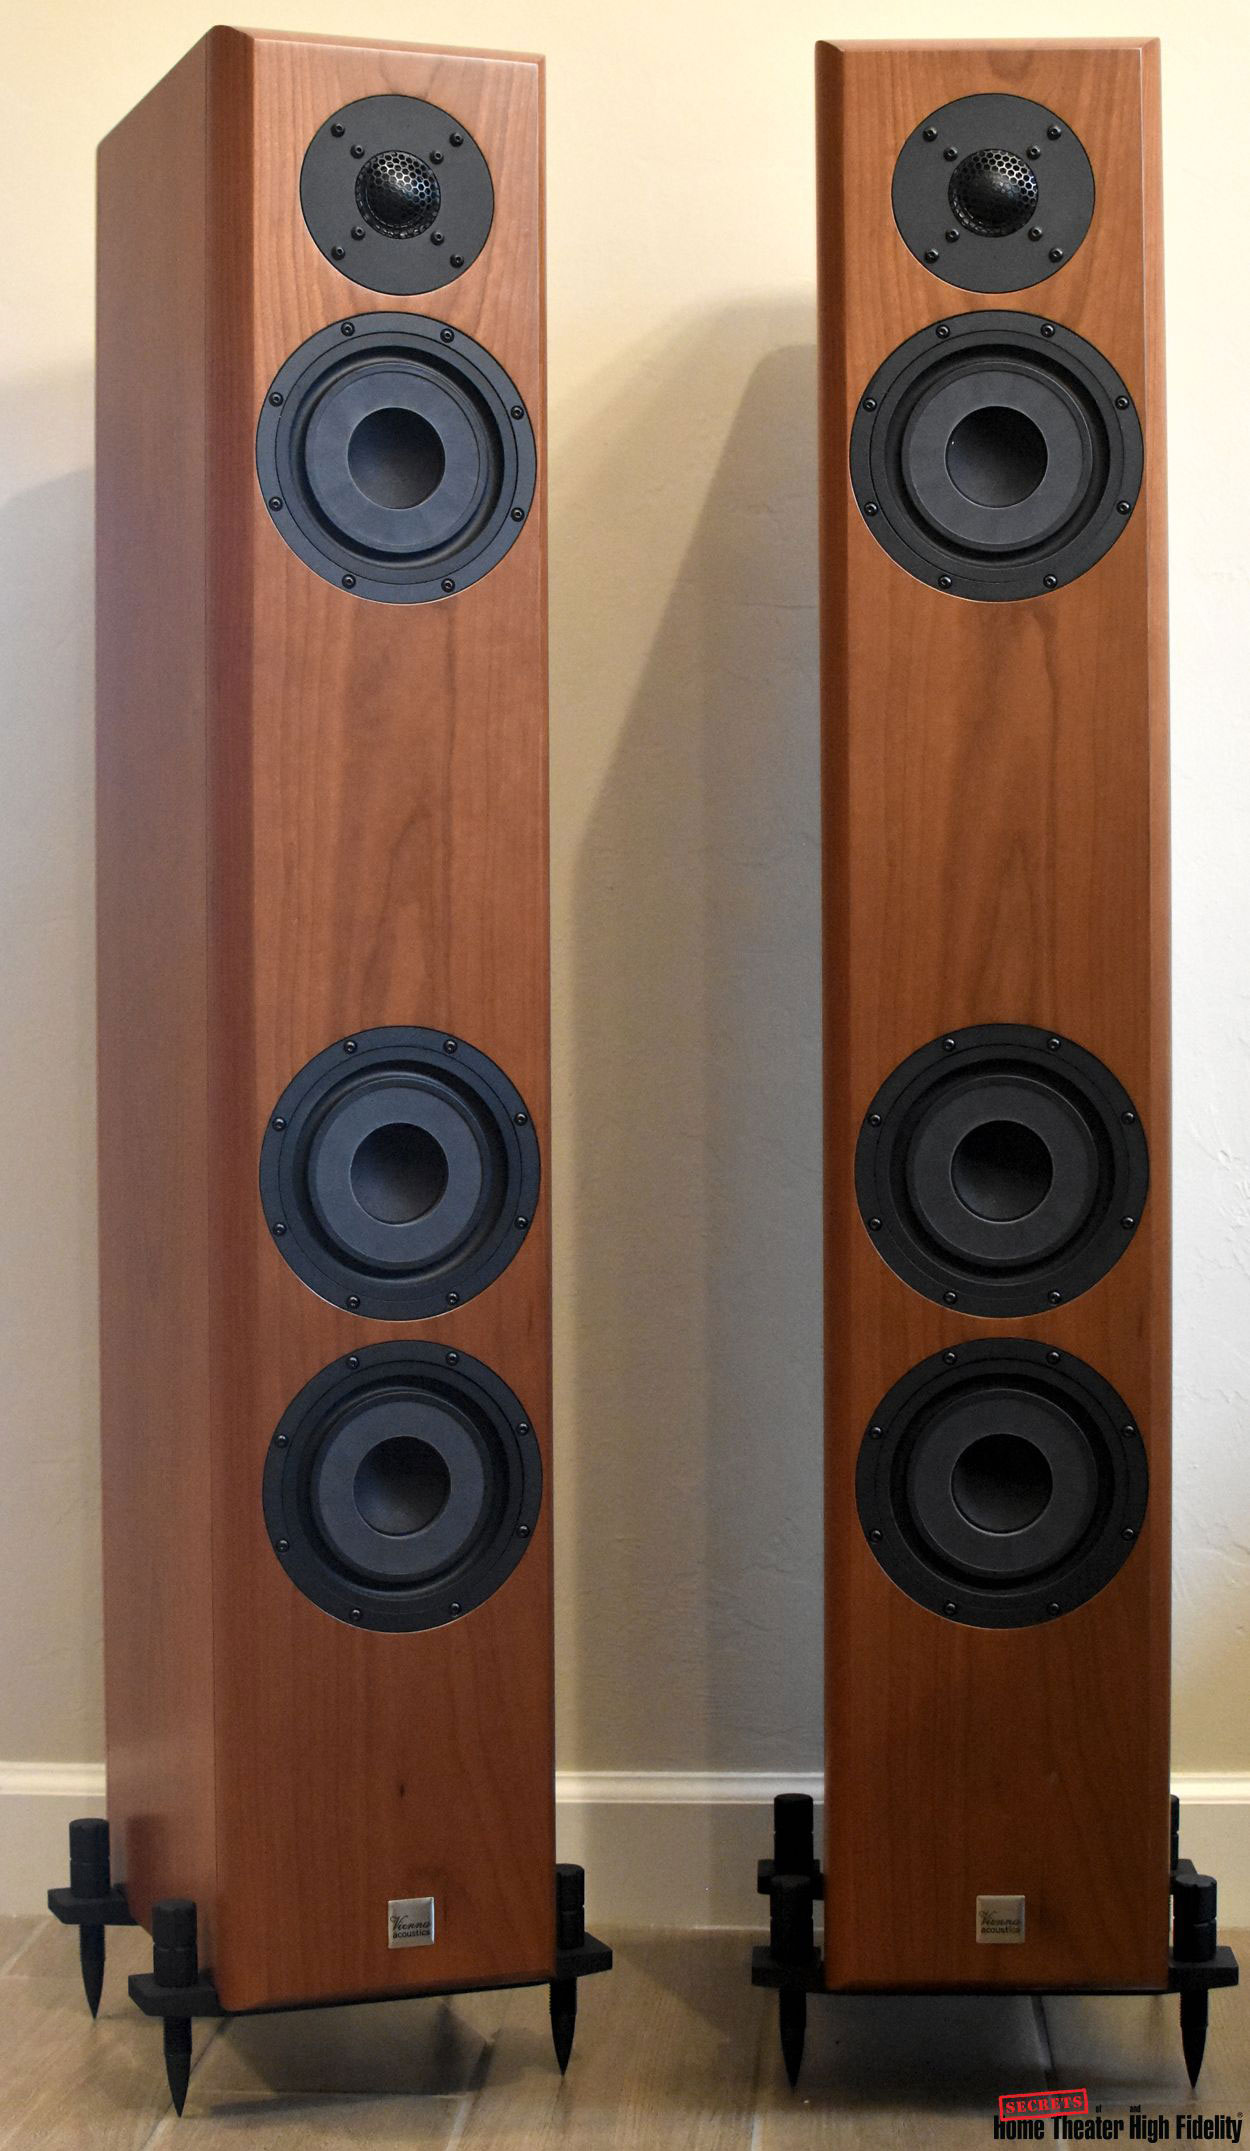 Vienna Acoustics Beethoven Baby Grand Reference speakers with grilles off